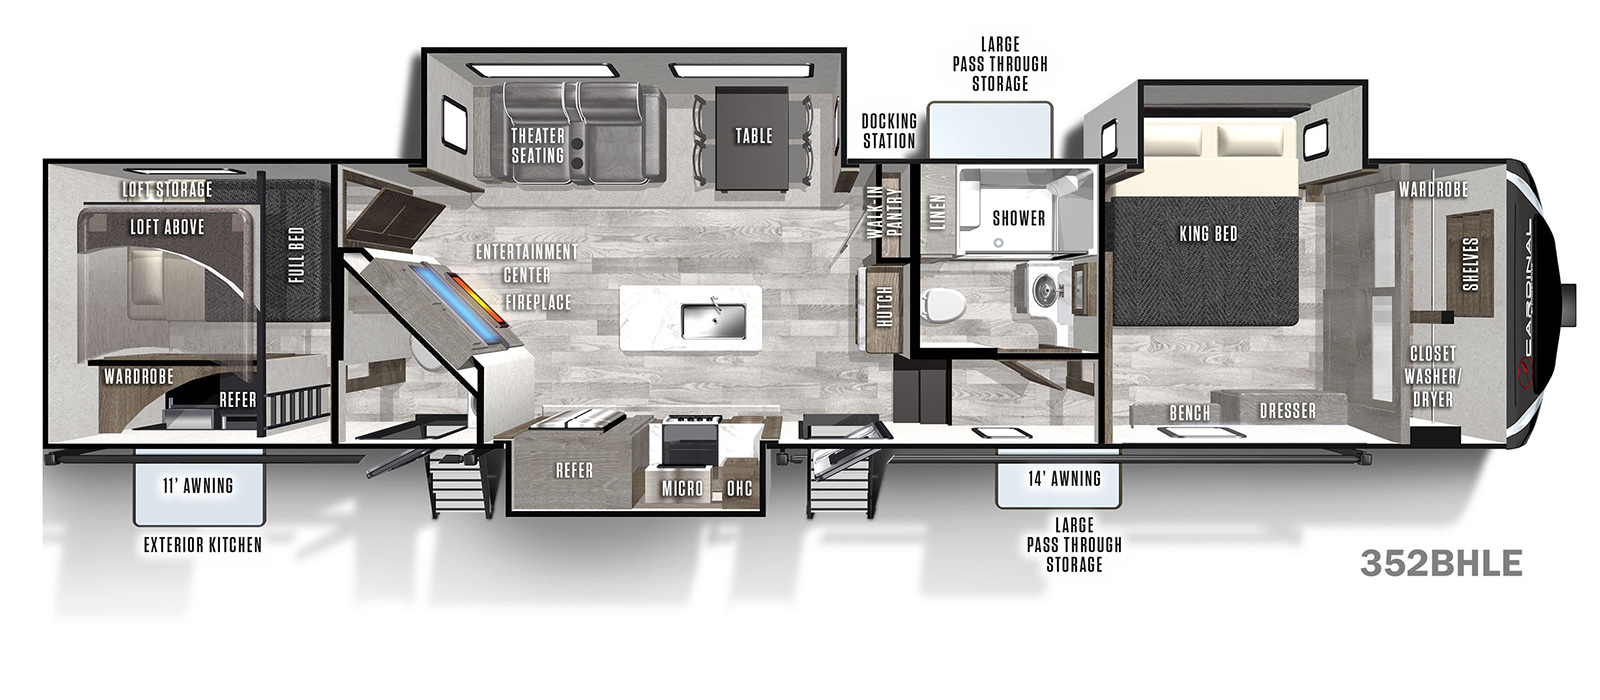 The 352BHLE has 3 slide outs, two on the off-door side and one on the door side, along with two entry doors on the door side. Interior layout from front to back: front bedroom with king bed in a off-door side slide out; side aisle bathroom; kitchen living dining area with off-door side slide out containing theater seating and freestanding table and chairs; kitchen island with single basin sink; door side slide out containing residential refrigerator, overhead microwave, cook top stove and overhead cabinet; half bath with exterior access; and rear bedroom with full bed below and loft above.